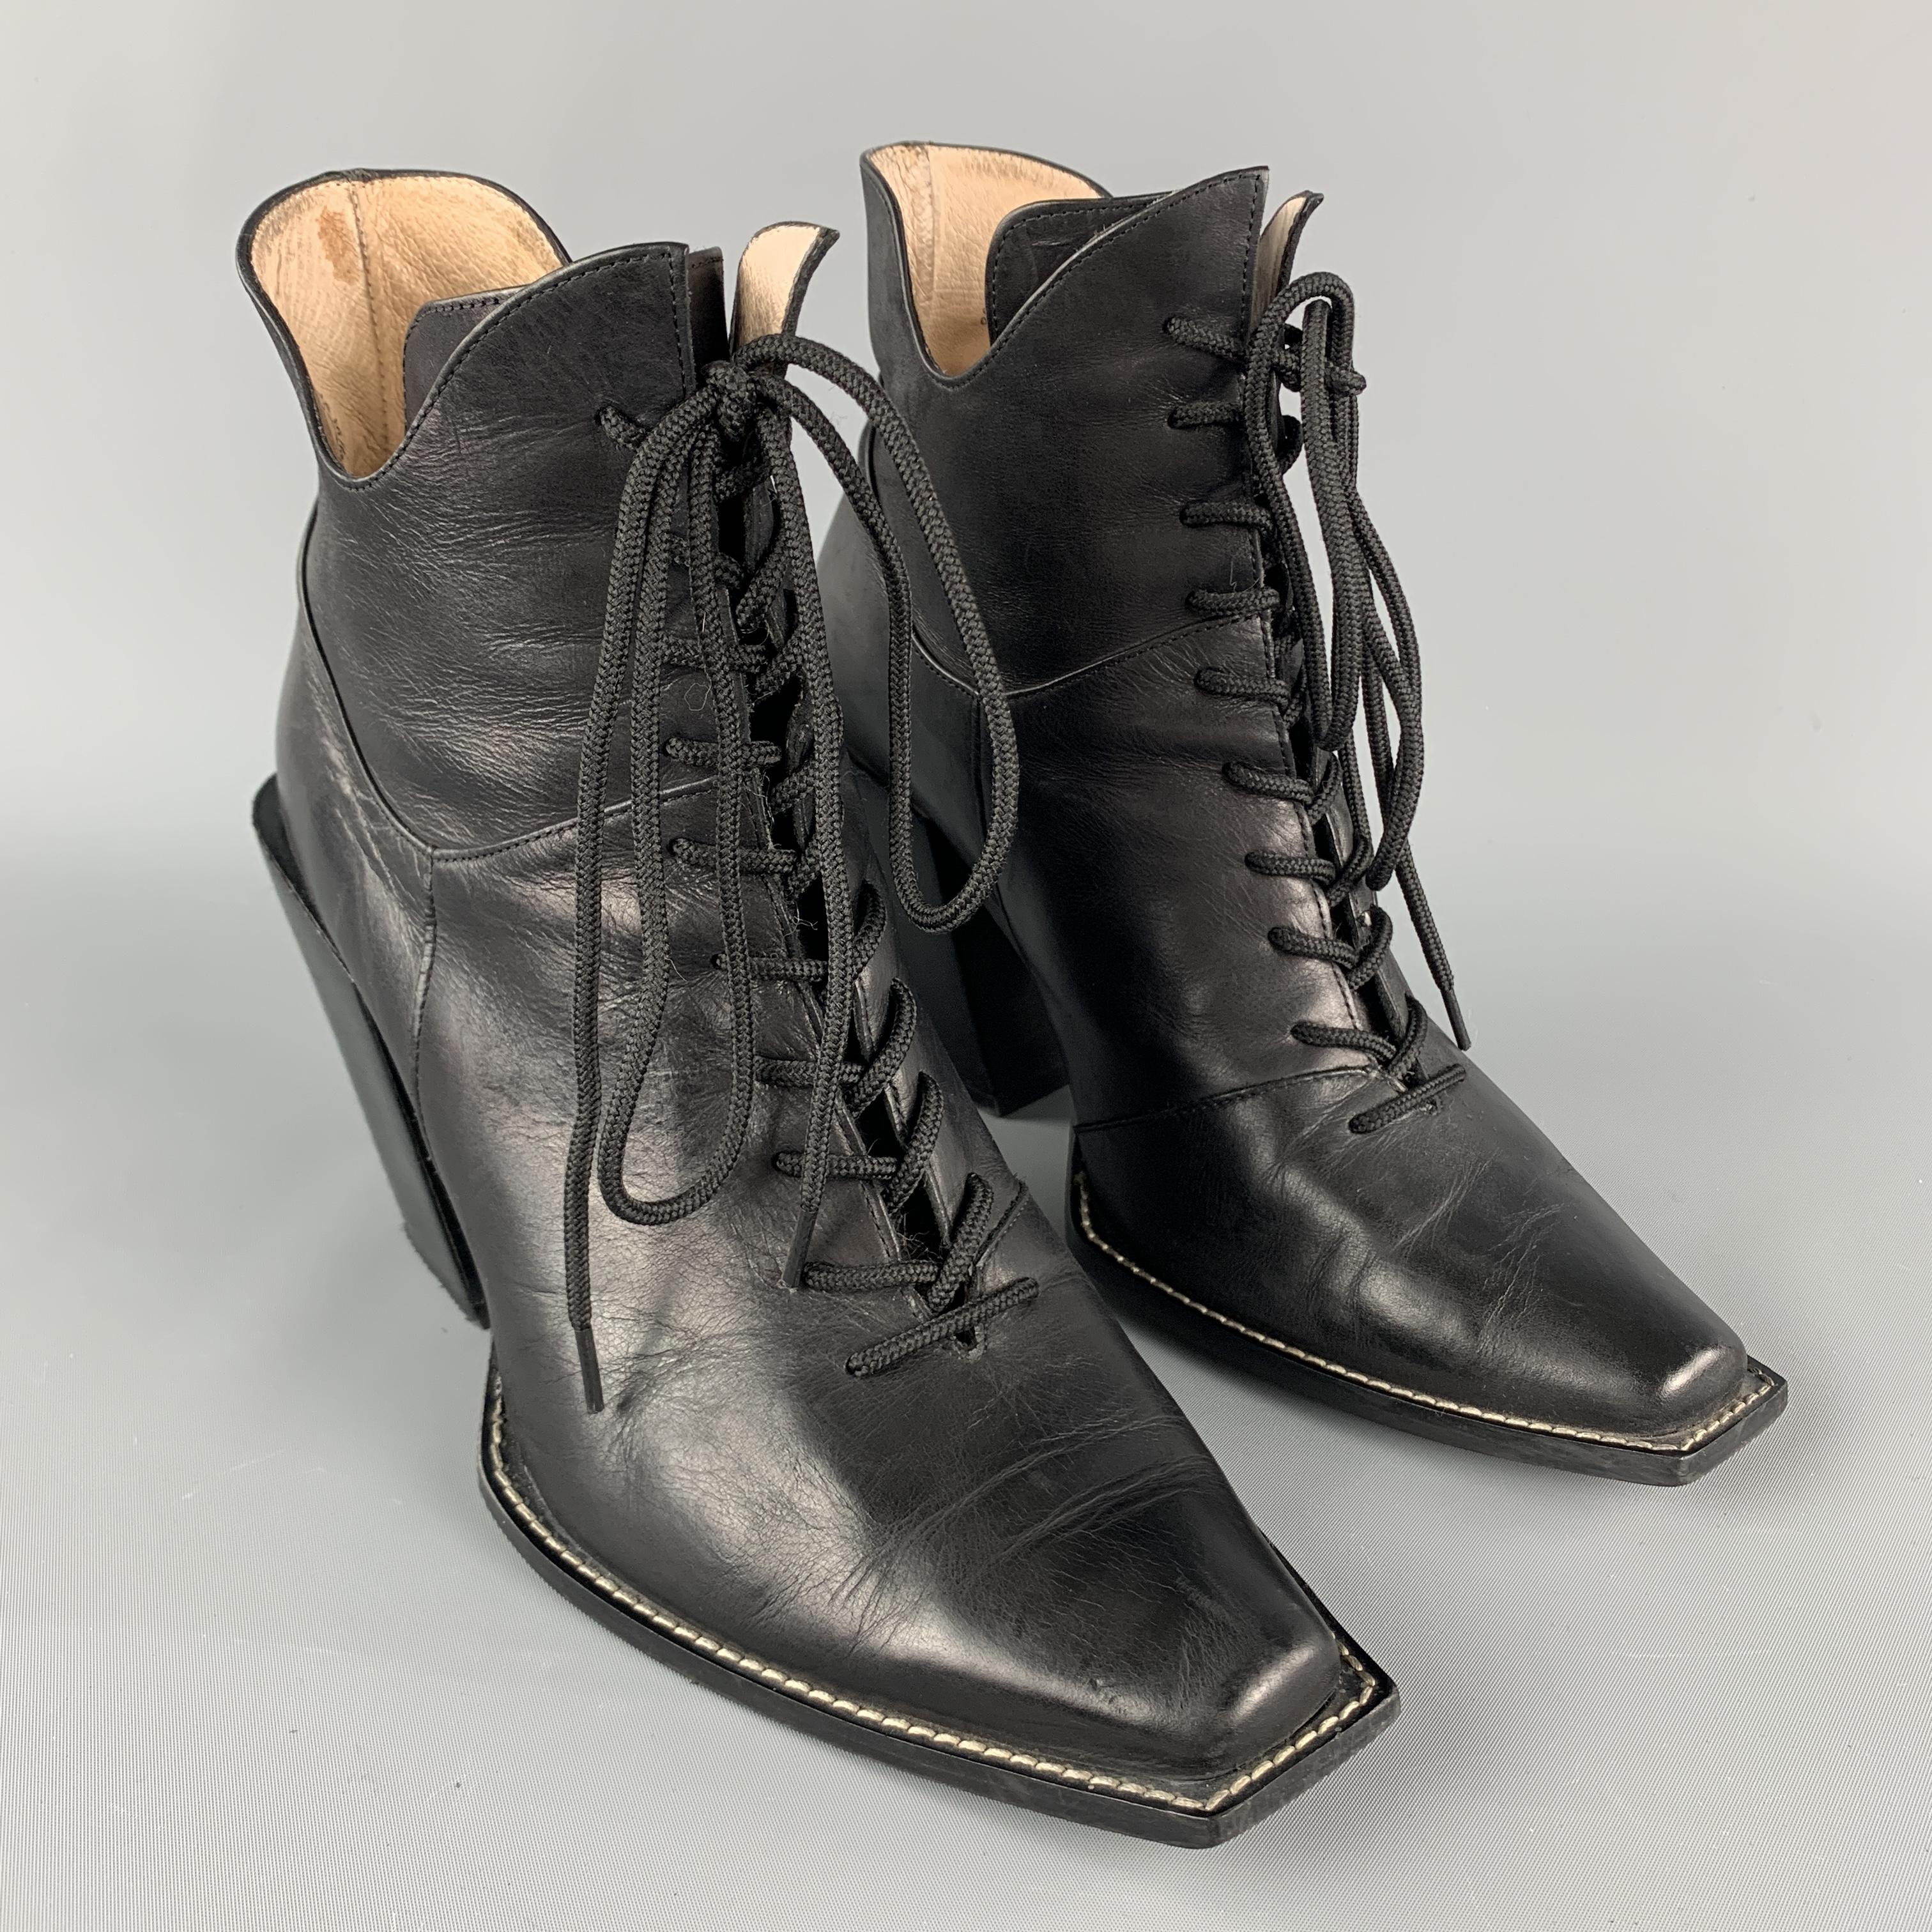 JOHN FLUEVOG Prince George Ankle Boots comes in a solid black leather material, featuring a contrast stitch, leather soles, leather wrapped slanted heels, lace up. Made in Portugal. 

Excellent Pre-Owned Condition.
Marked: 10

Measurements:

Heel: 4